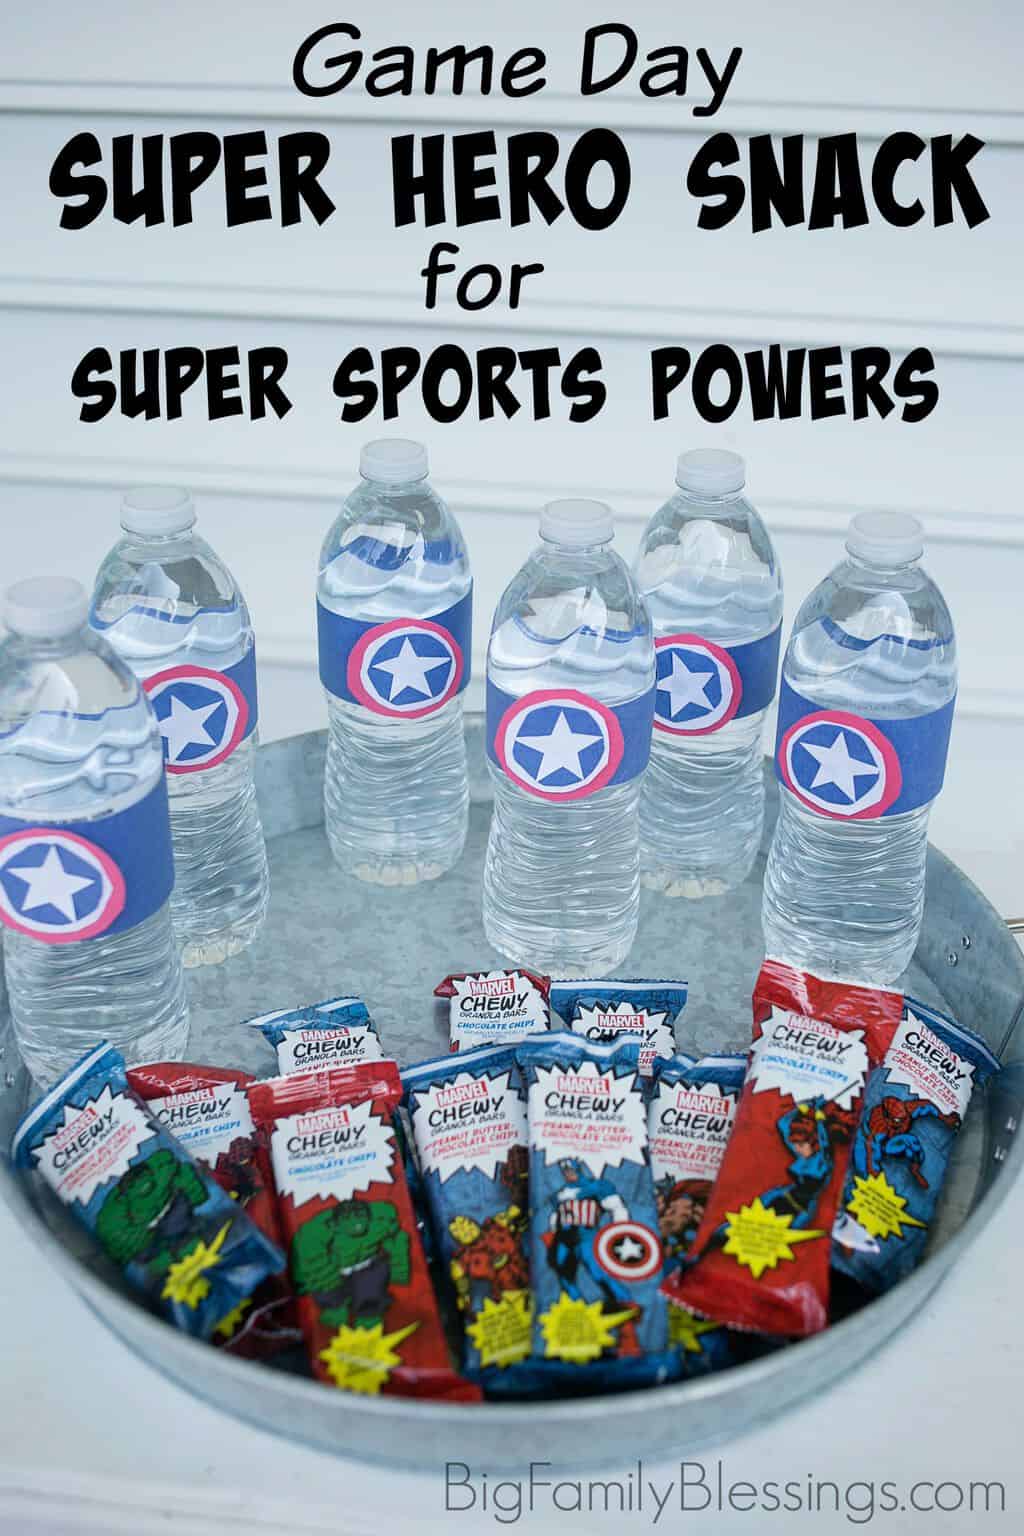 Create a Super Hero Snack on Game Day for Super Sports Powers